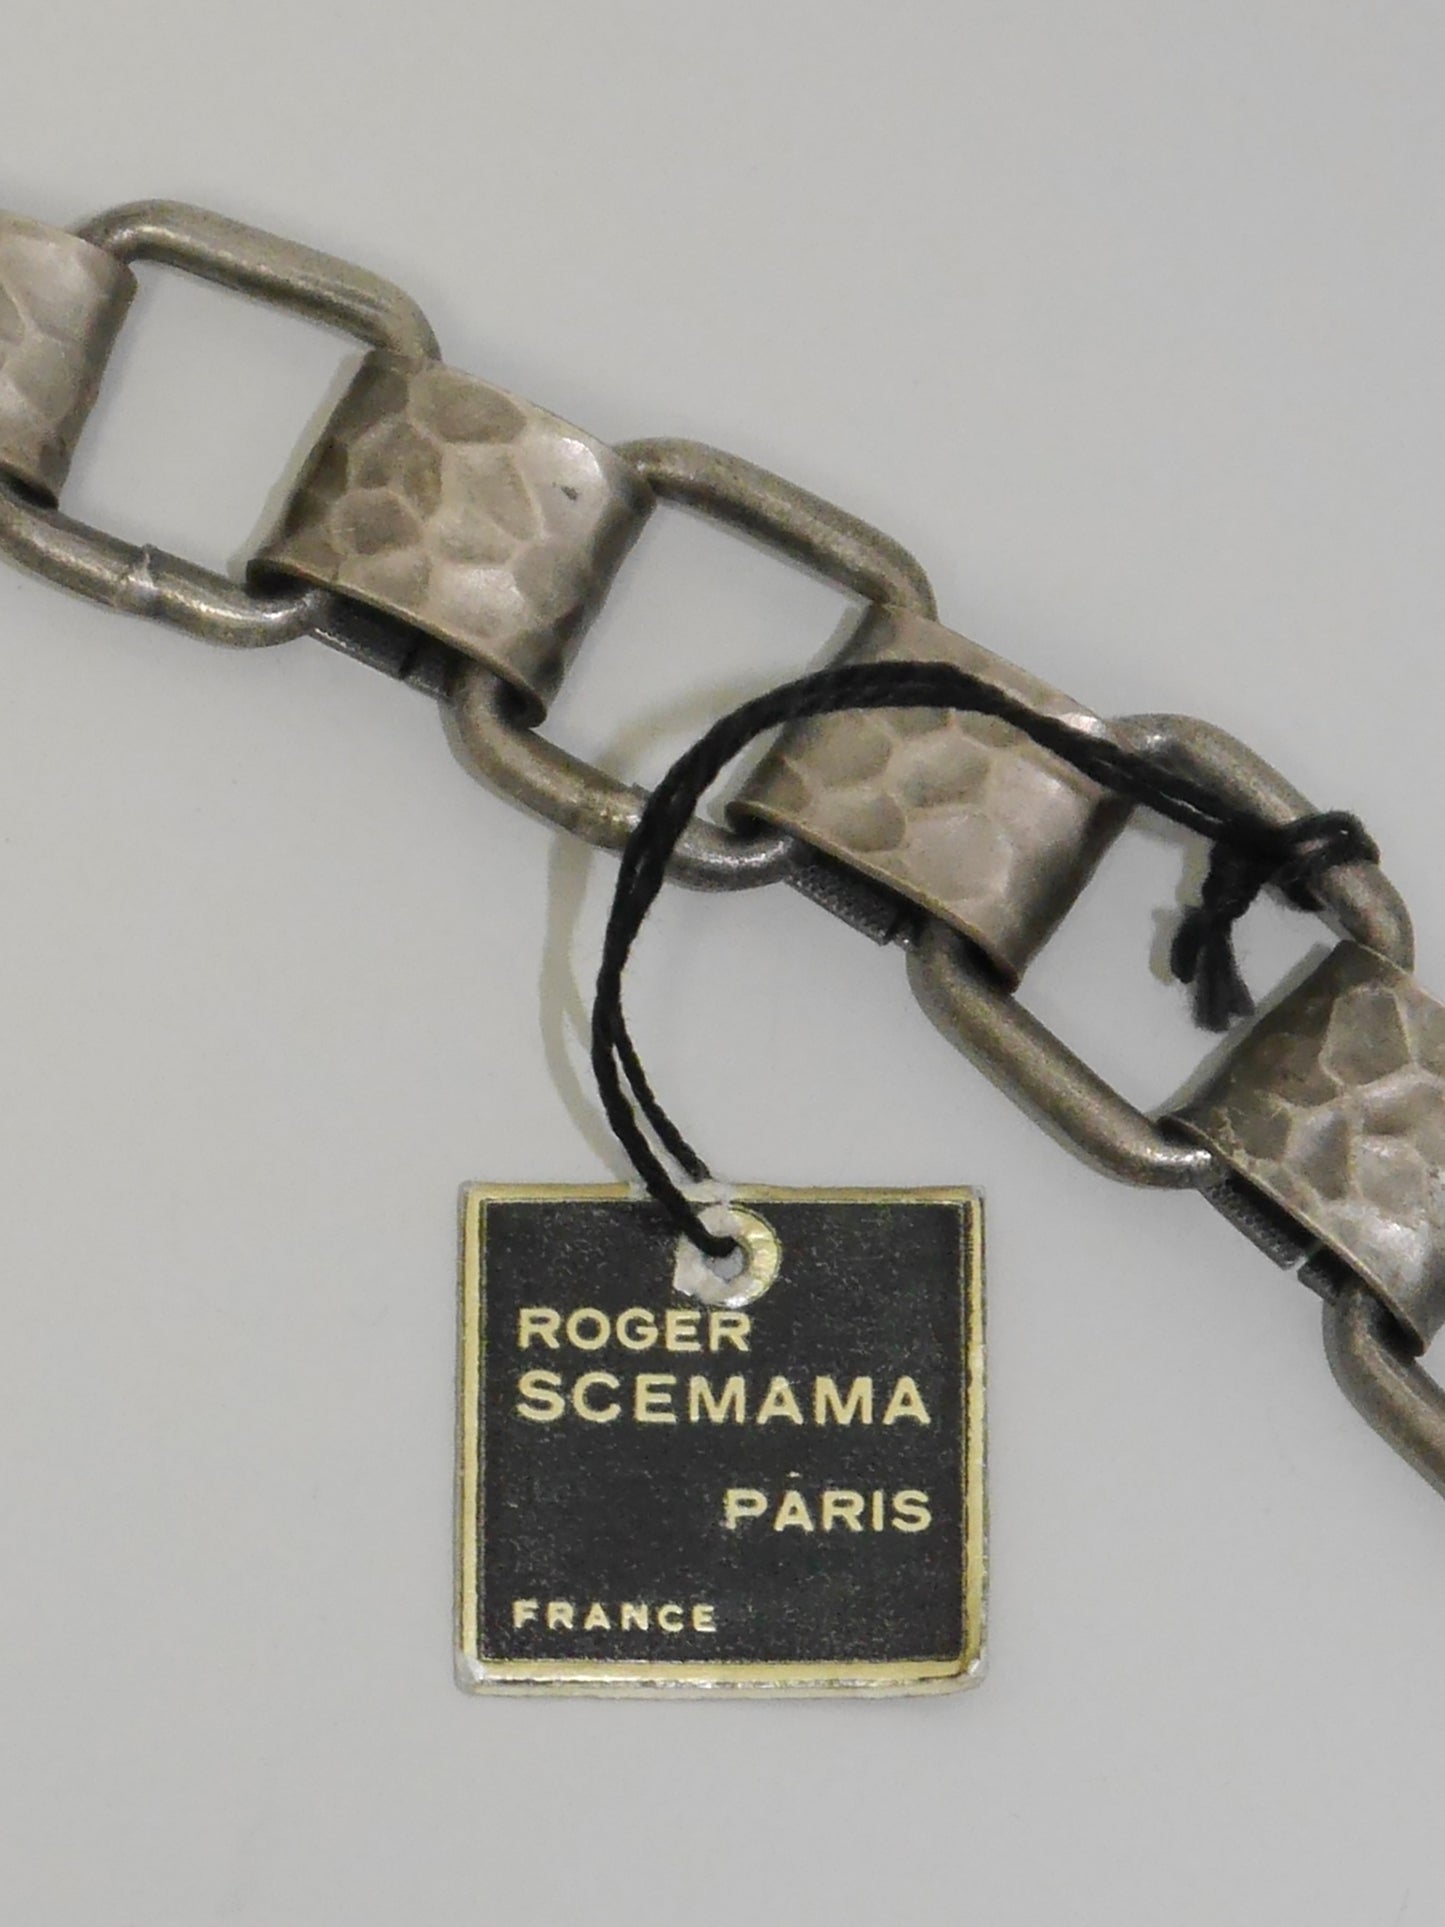 YVES SAINT LAURENT by Roger Scemama 1960s 1970s Vintage Chain Belt or Necklace